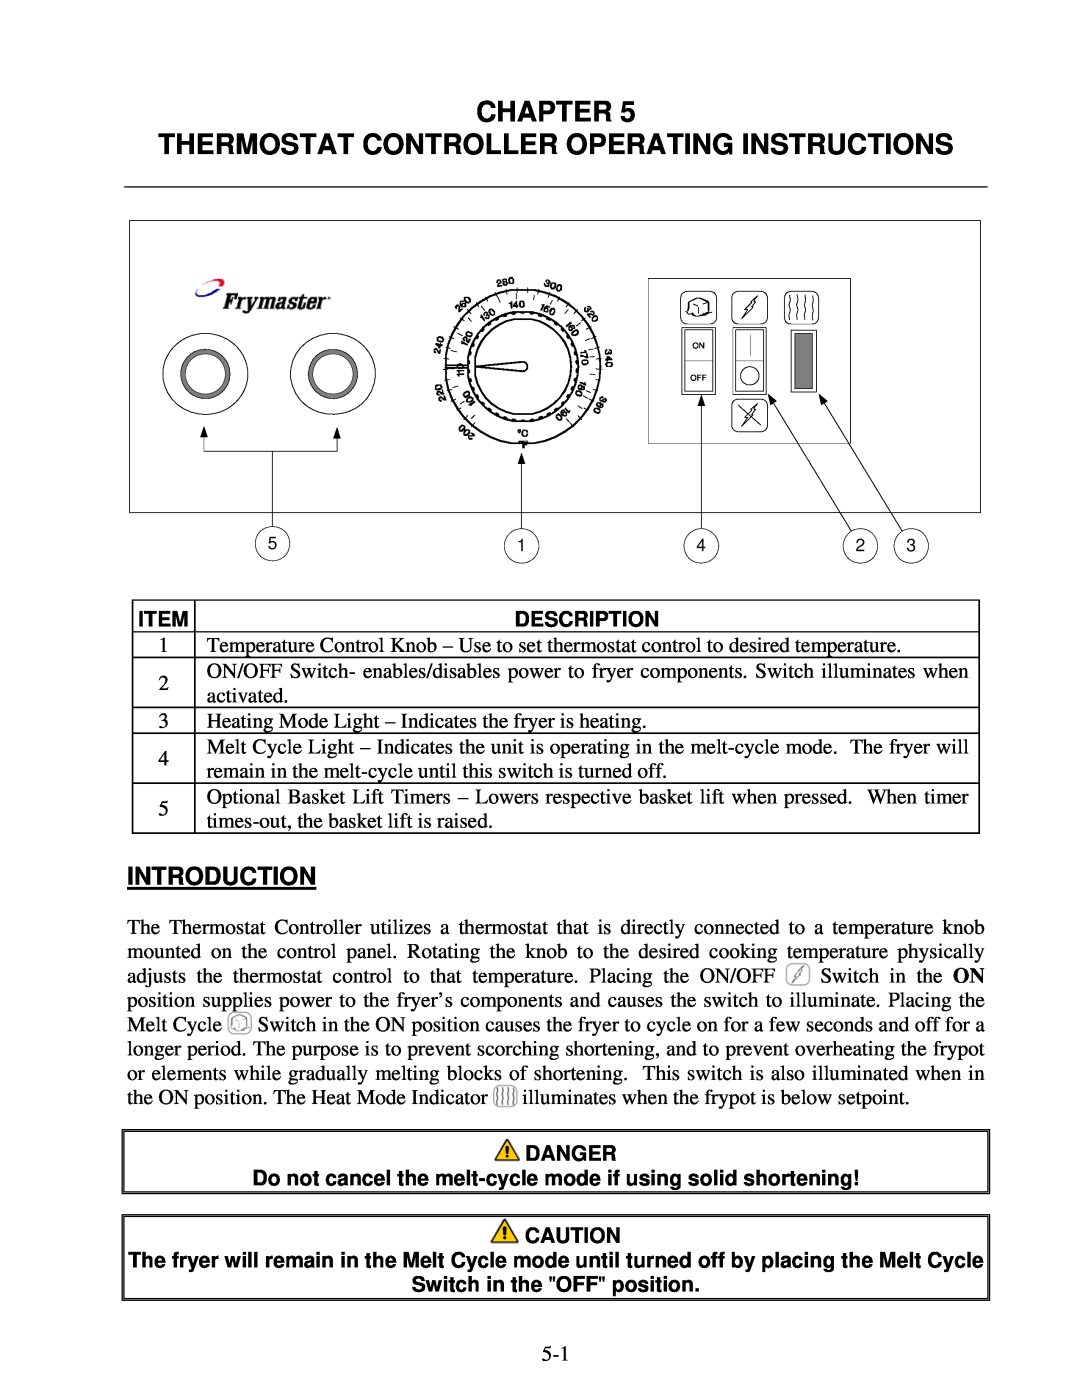 Frymaster 8195916 Chapter Thermostat Controller Operating Instructions, Switch in the OFF position, Introduction 